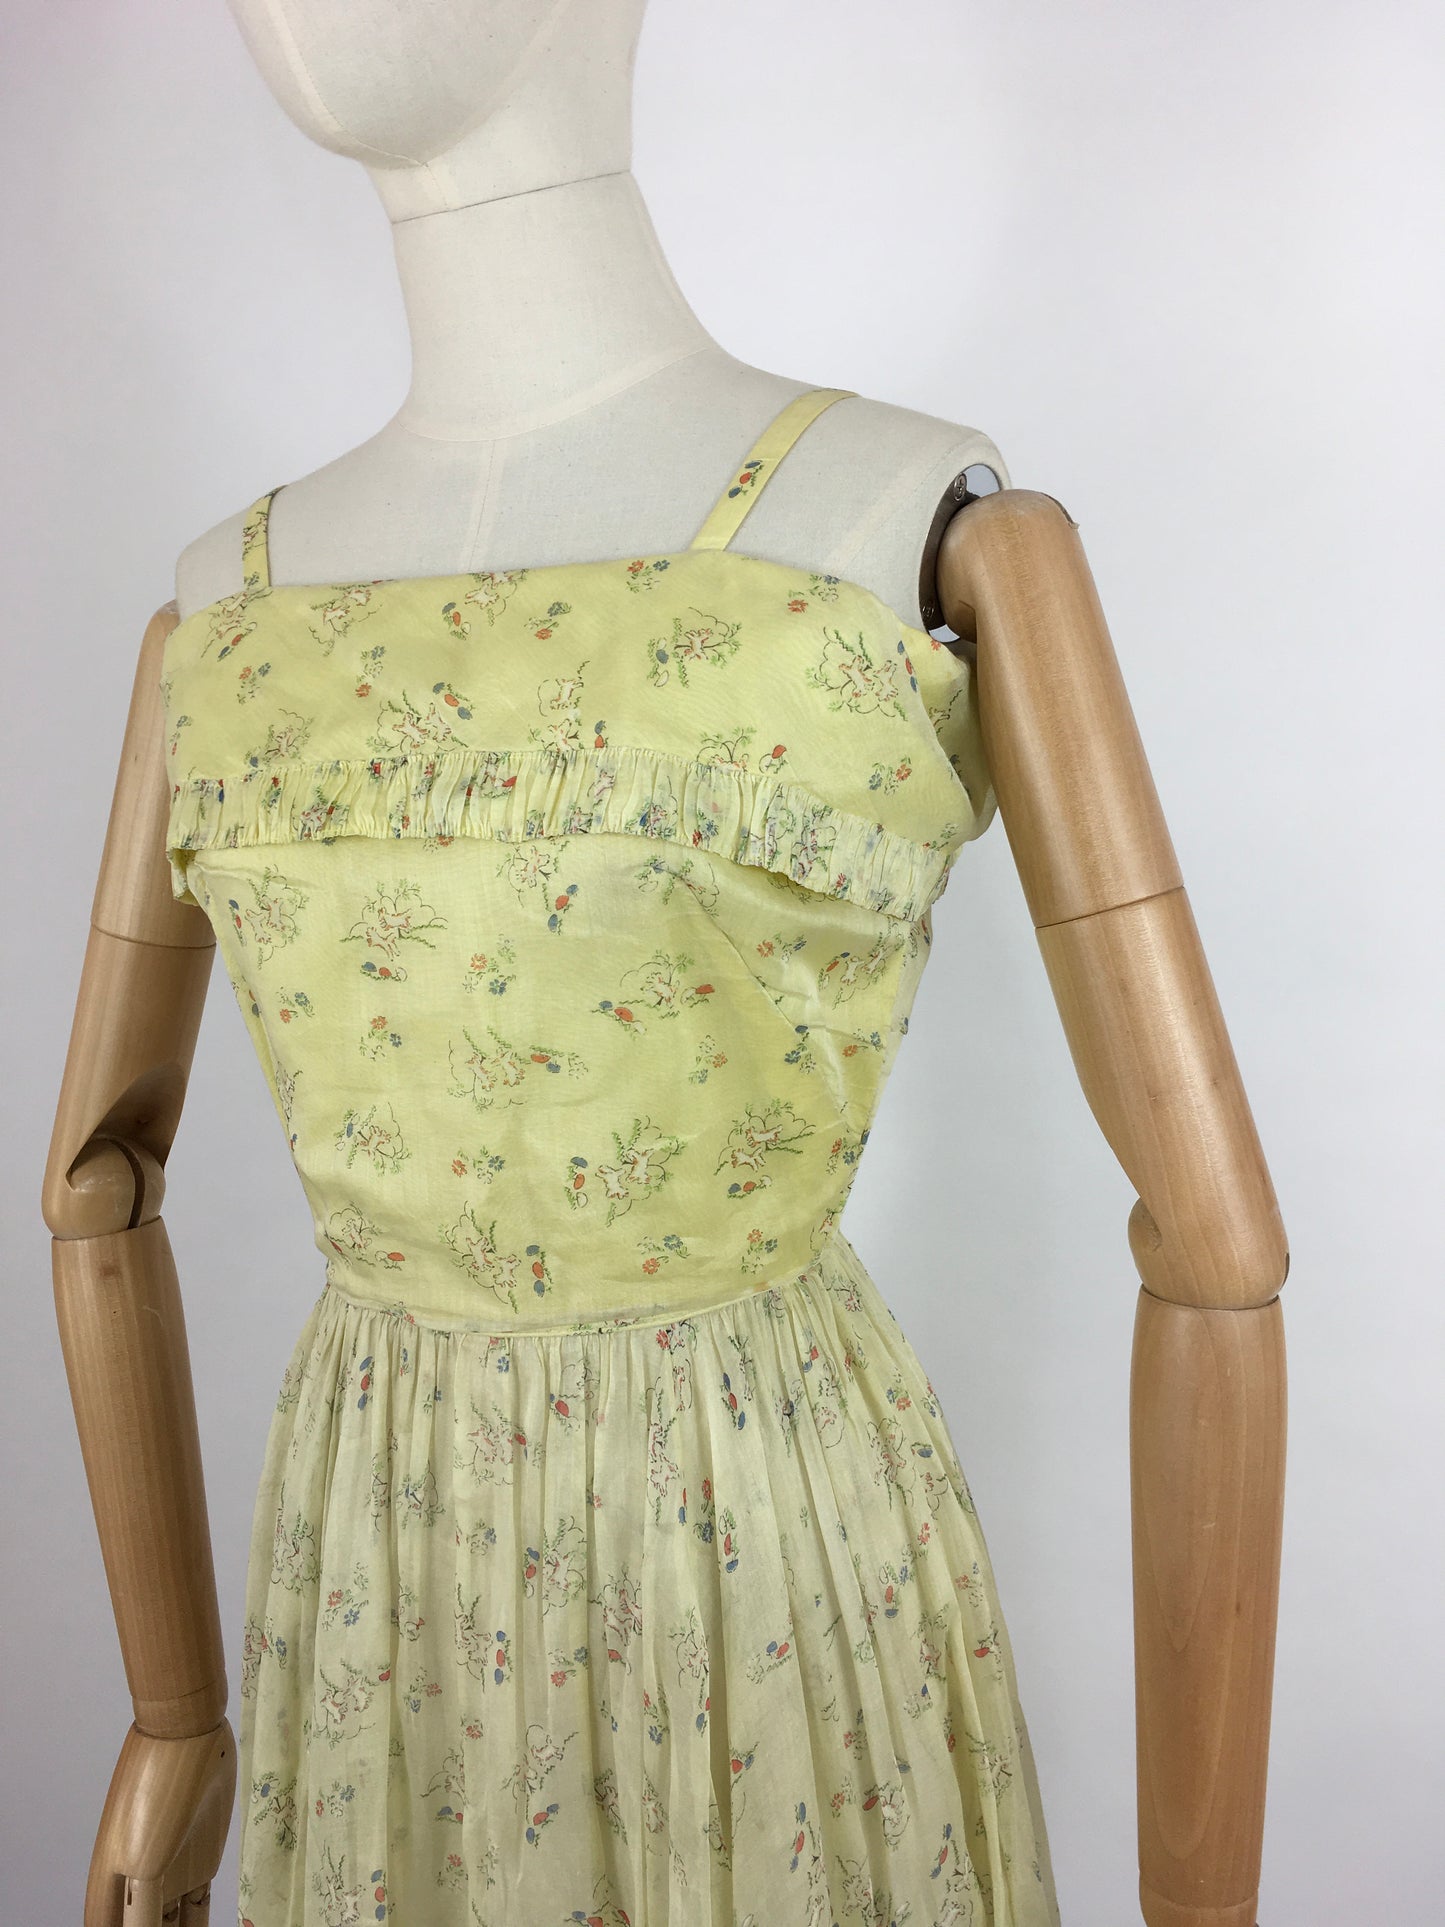 Original 1930s Sundress - In an Amazing Novelty Print Featuring Leaping Lambs and Toadstools On a Pale Lemon Cotton Lawn